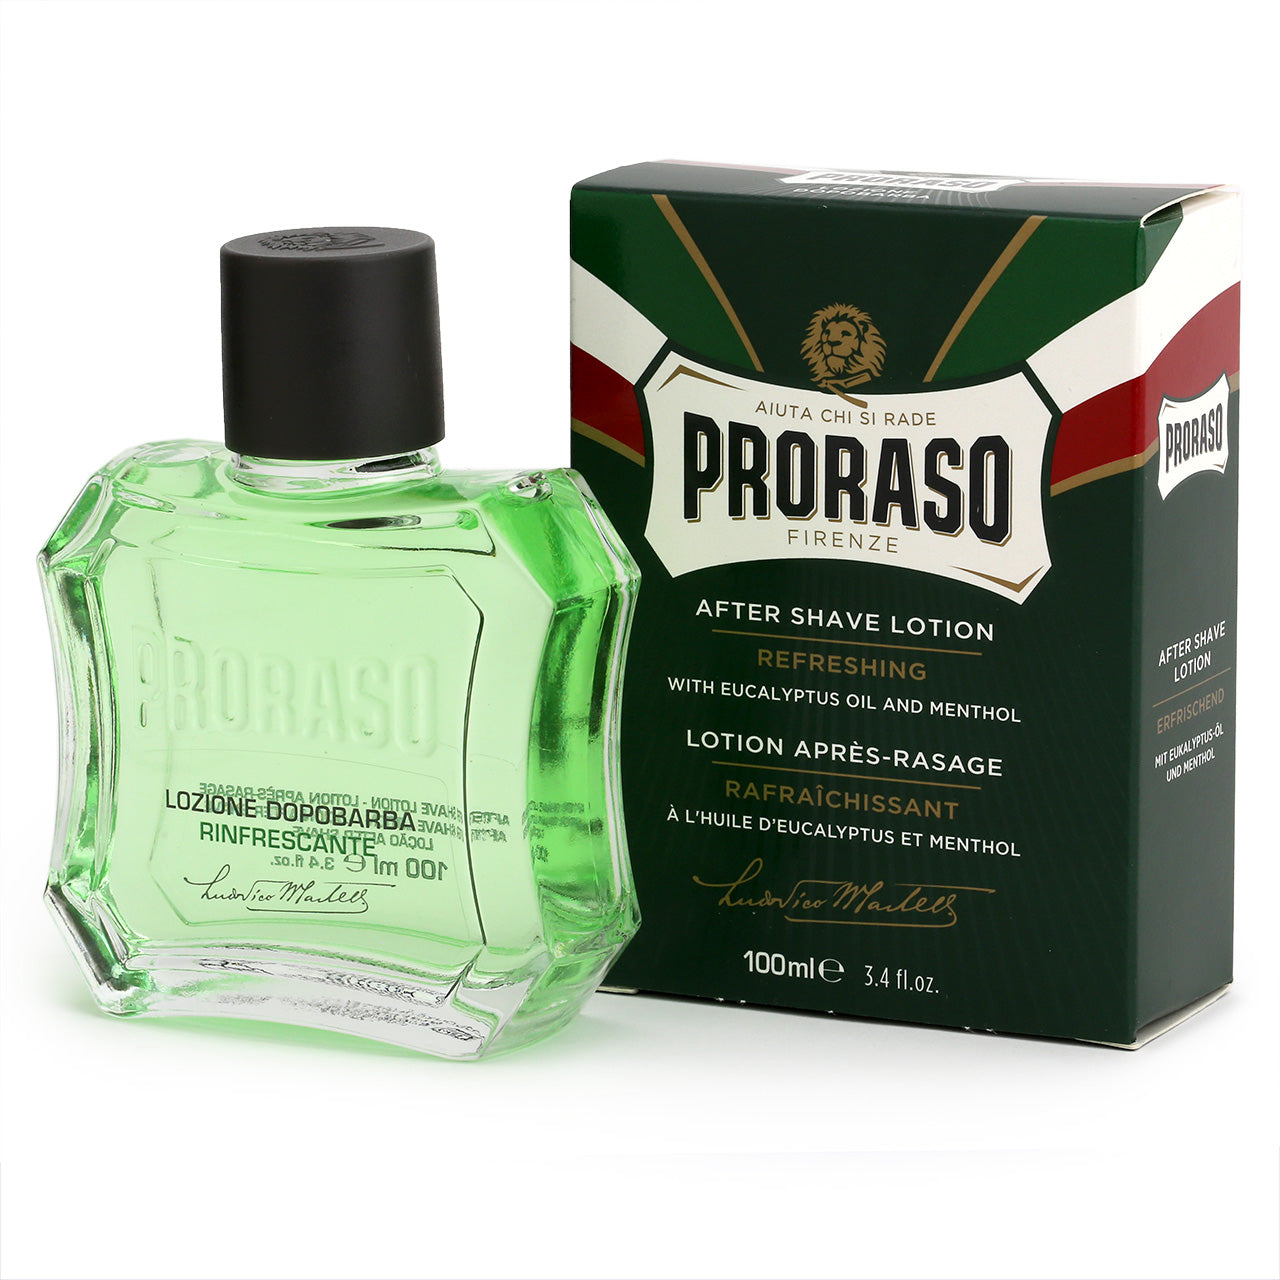 Proraso After Shave Lotion with Eucalyptus & Menthol - Refreshing - with retro bottle shape and box